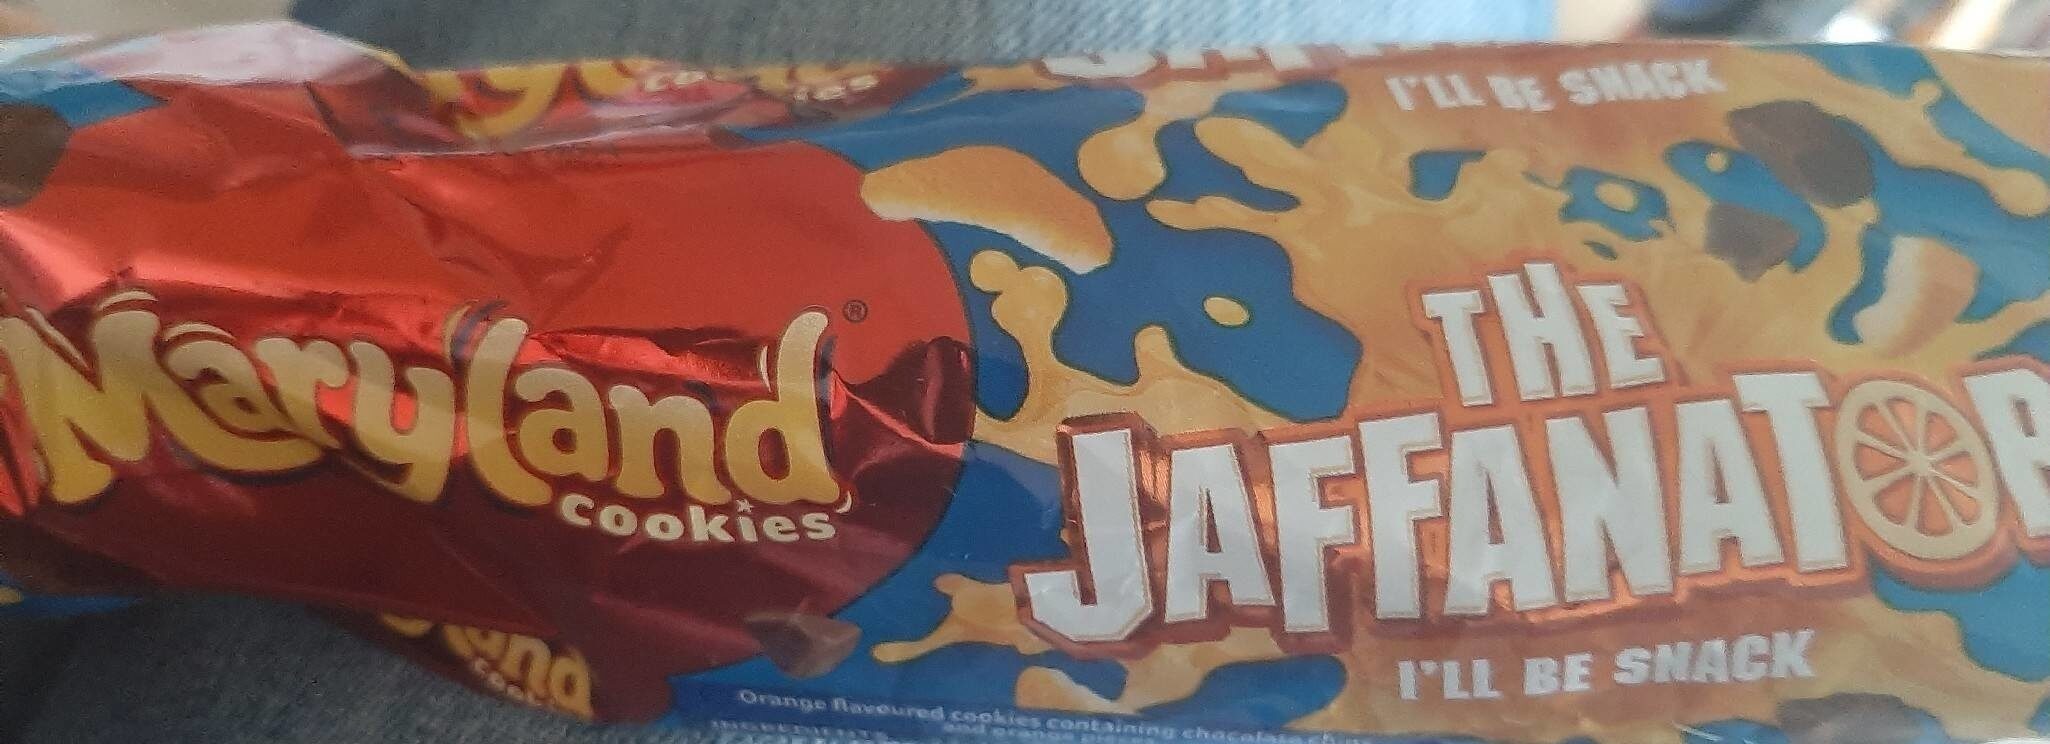 Maryland Cookies The Jaffanator - Product